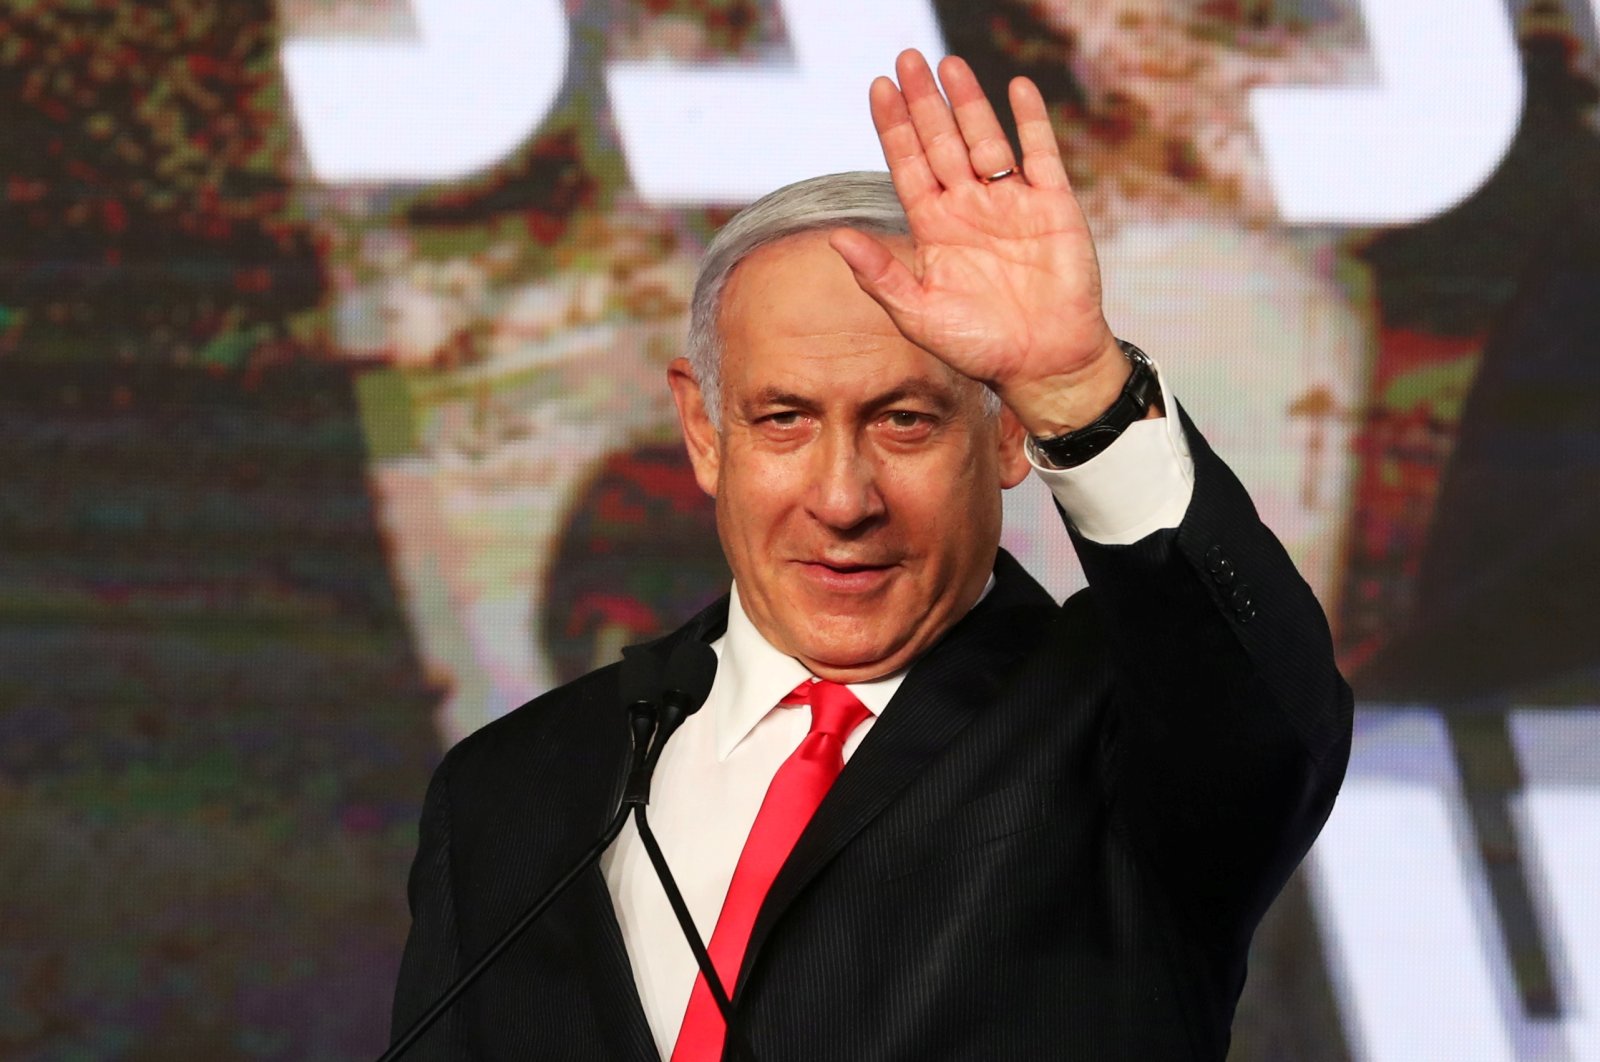 Israeli Prime Minister Benjamin Netanyahu gestures as he delivers a speech to supporters following the announcement of exit polls in Israel's general election at his Likud party headquarters in Jerusalem, Israel, March 24, 2021. (Reuters Photo)